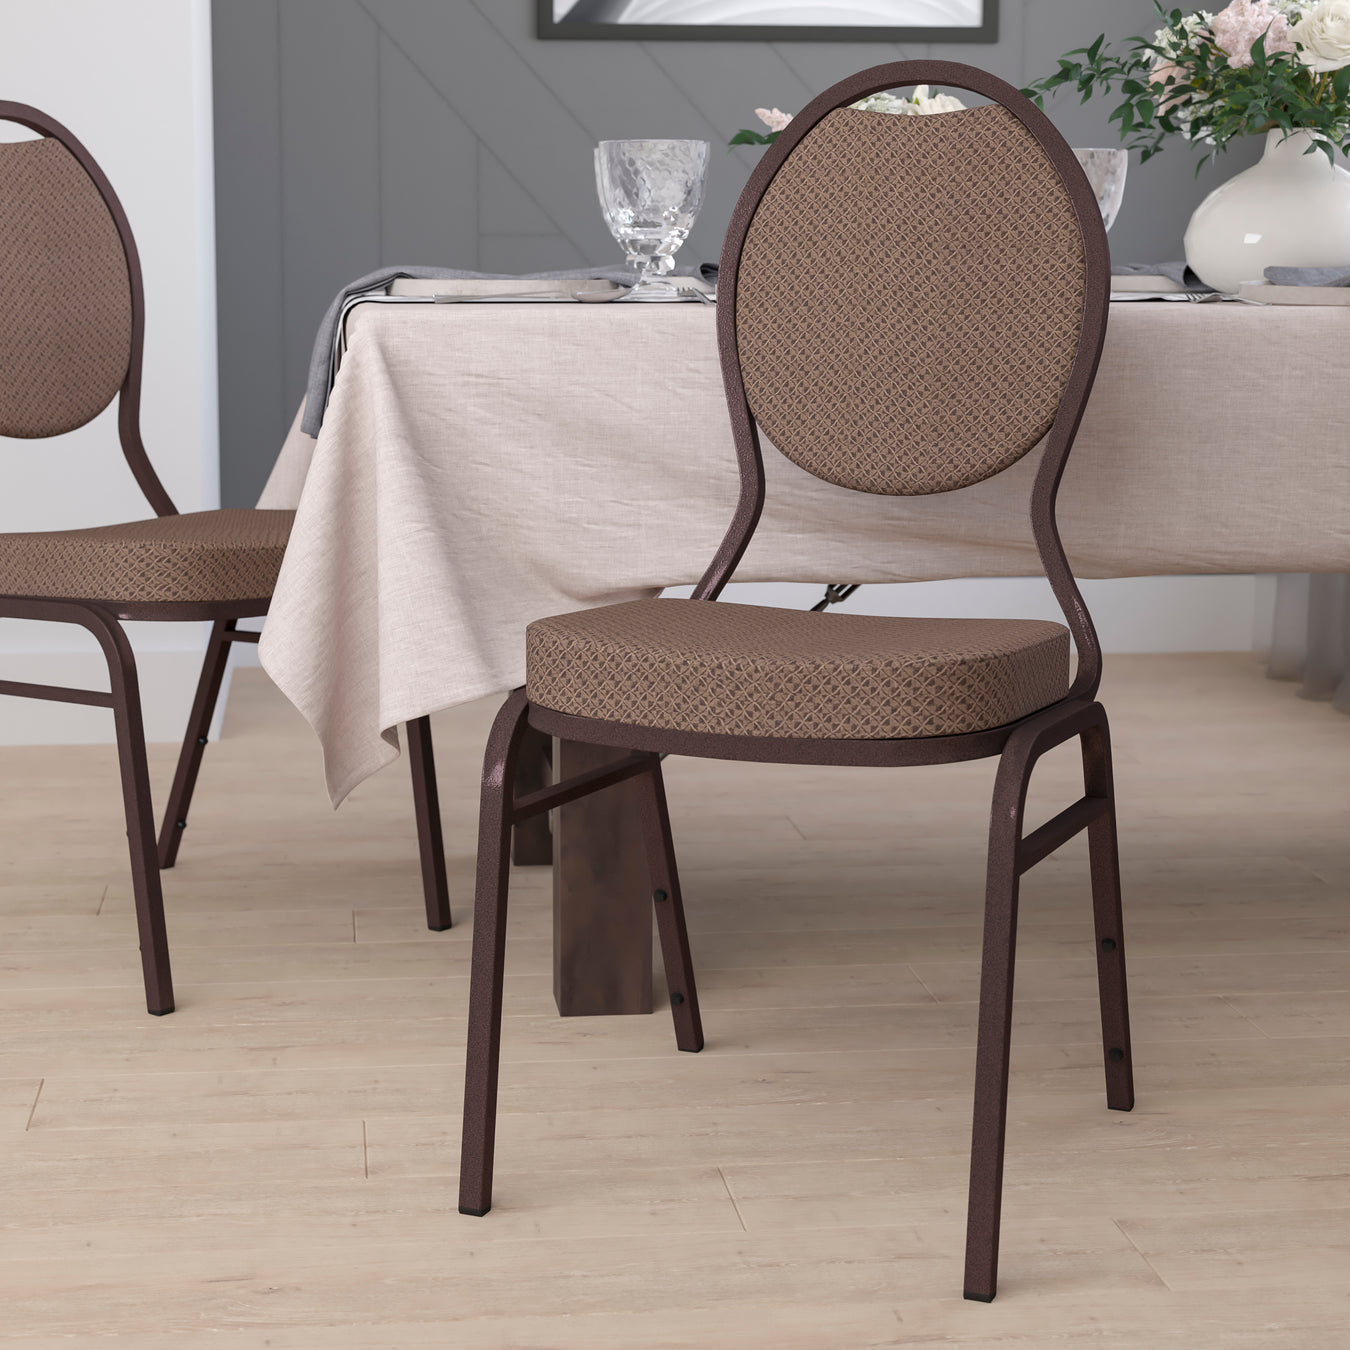 Stylish Affordable Stacking Chairs